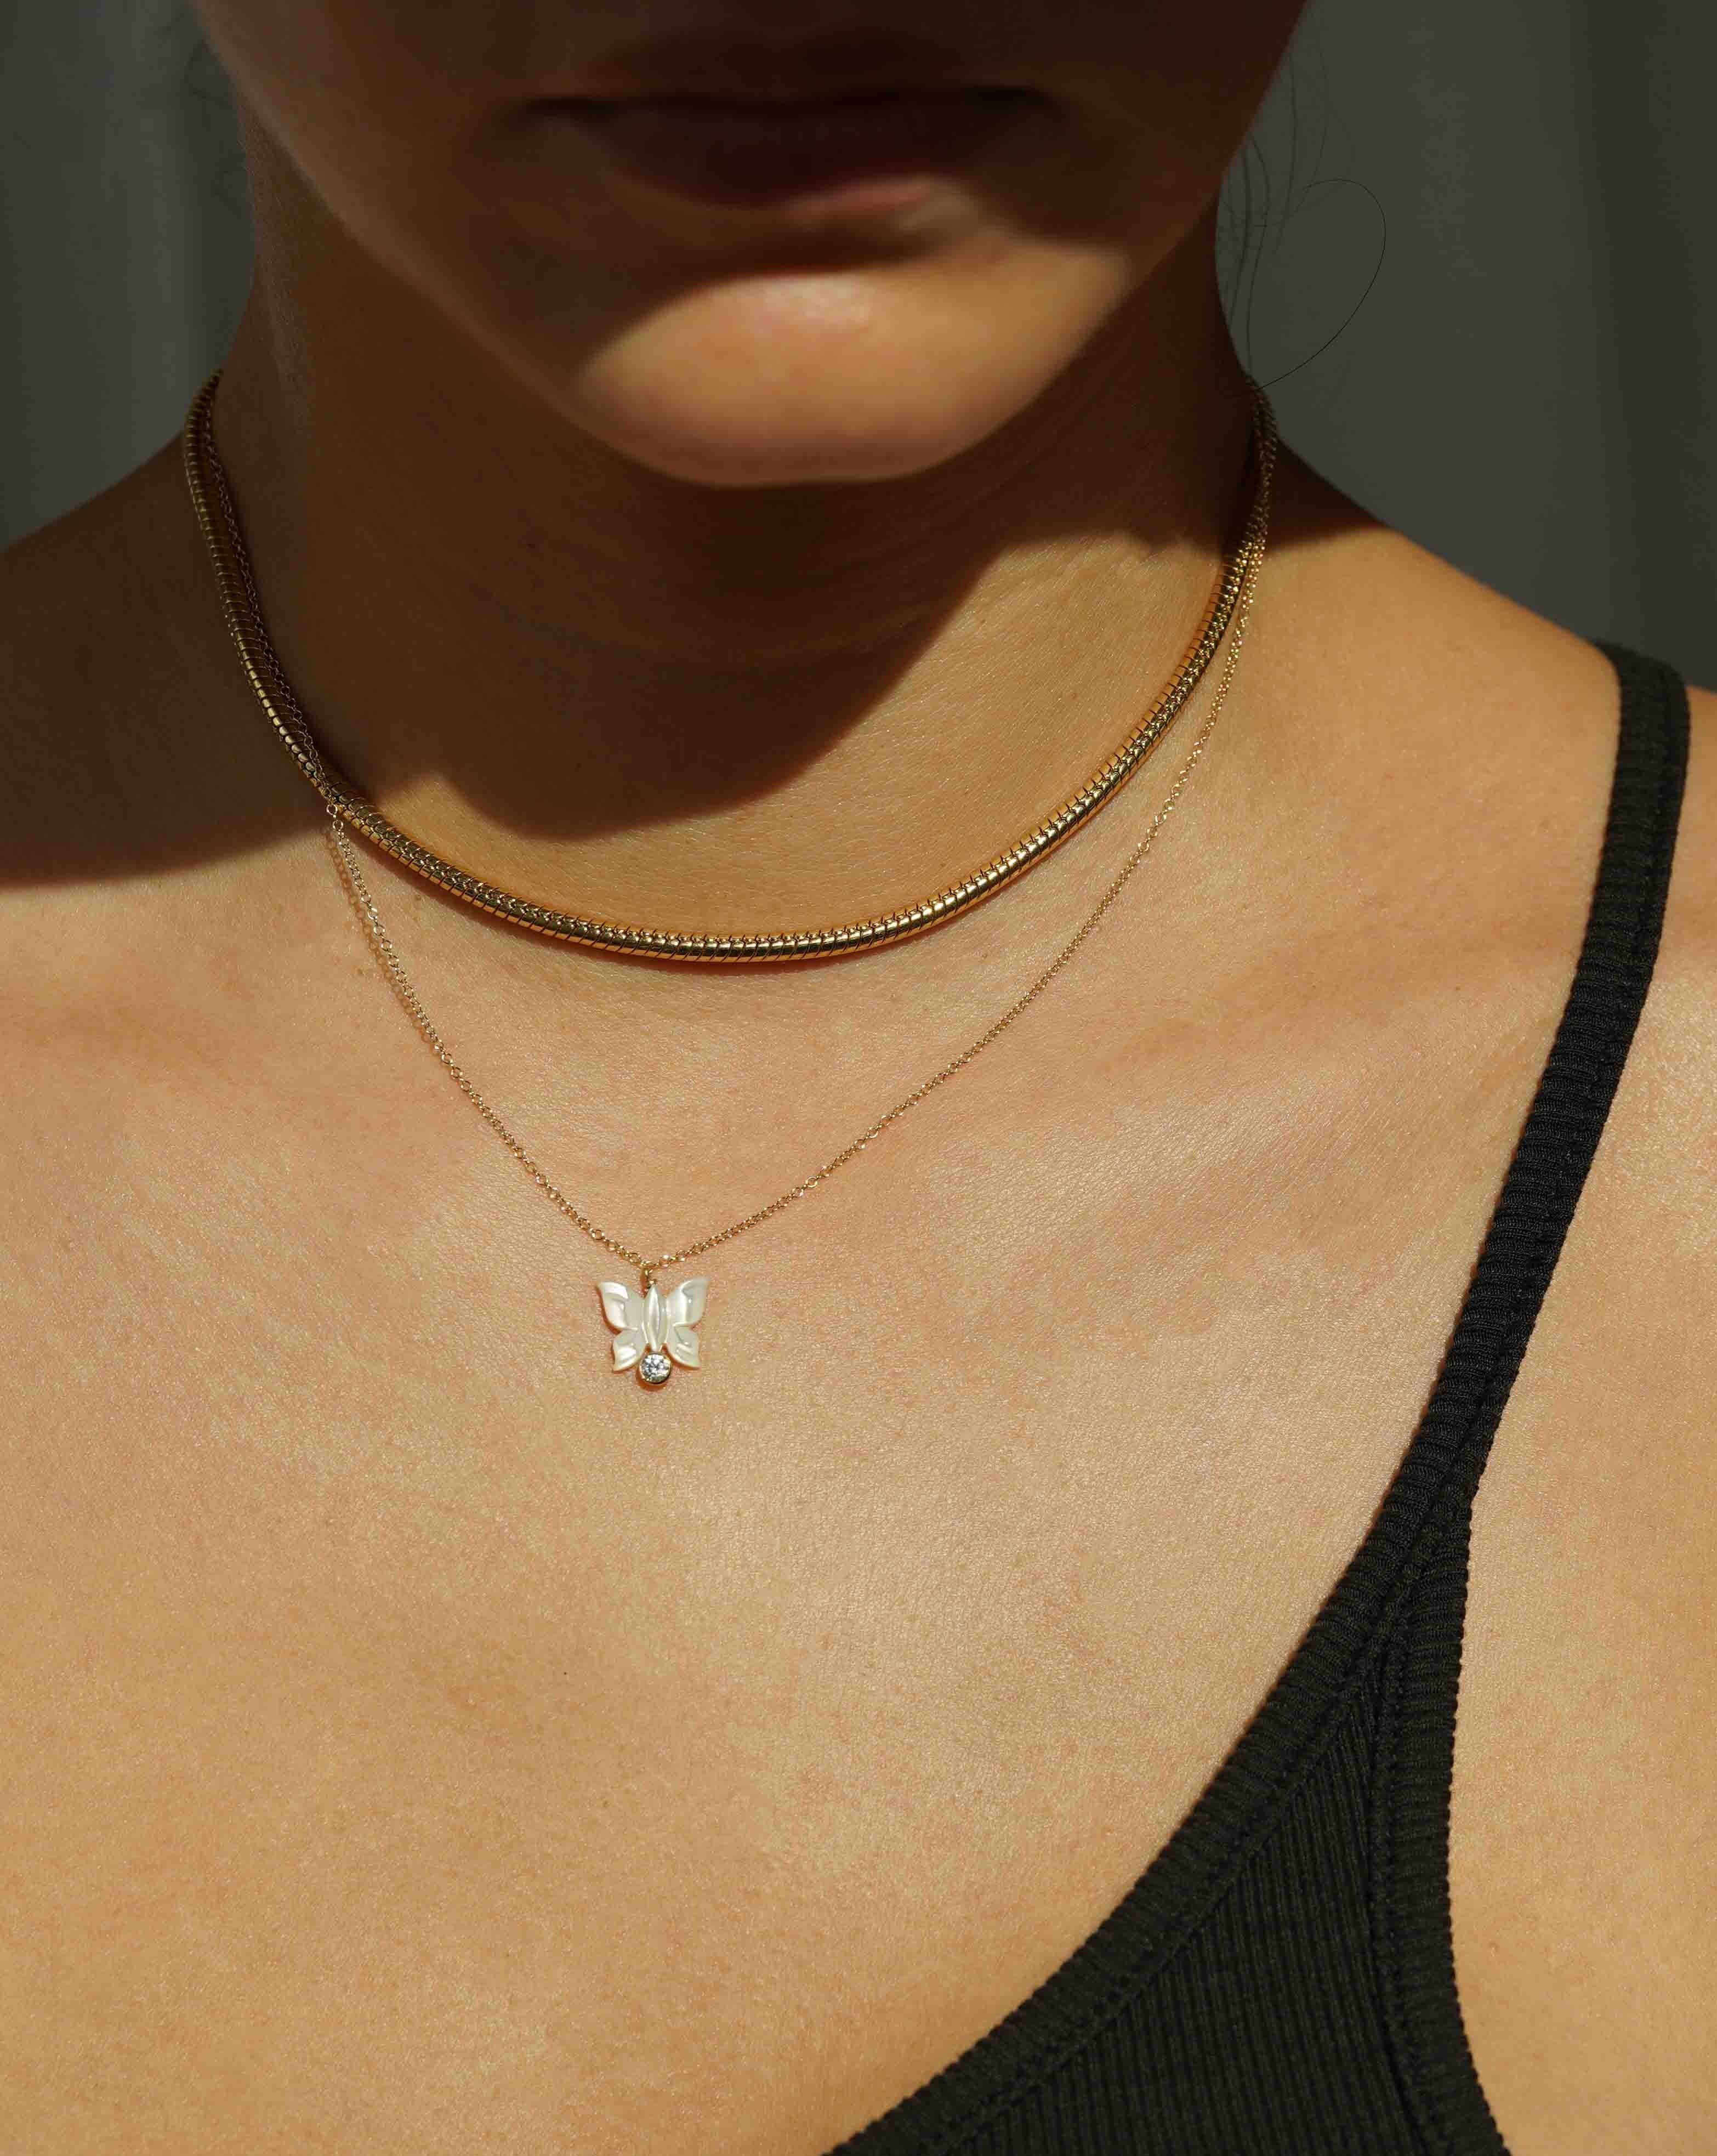 Halo Necklace by KOZAKH. A 16 to 18 inch adjustable length necklace in 14K Gold Filled, featuring a hand-carved Mother of Pearl butterfly charm and a 3mm Cubic Zirconia bezel.